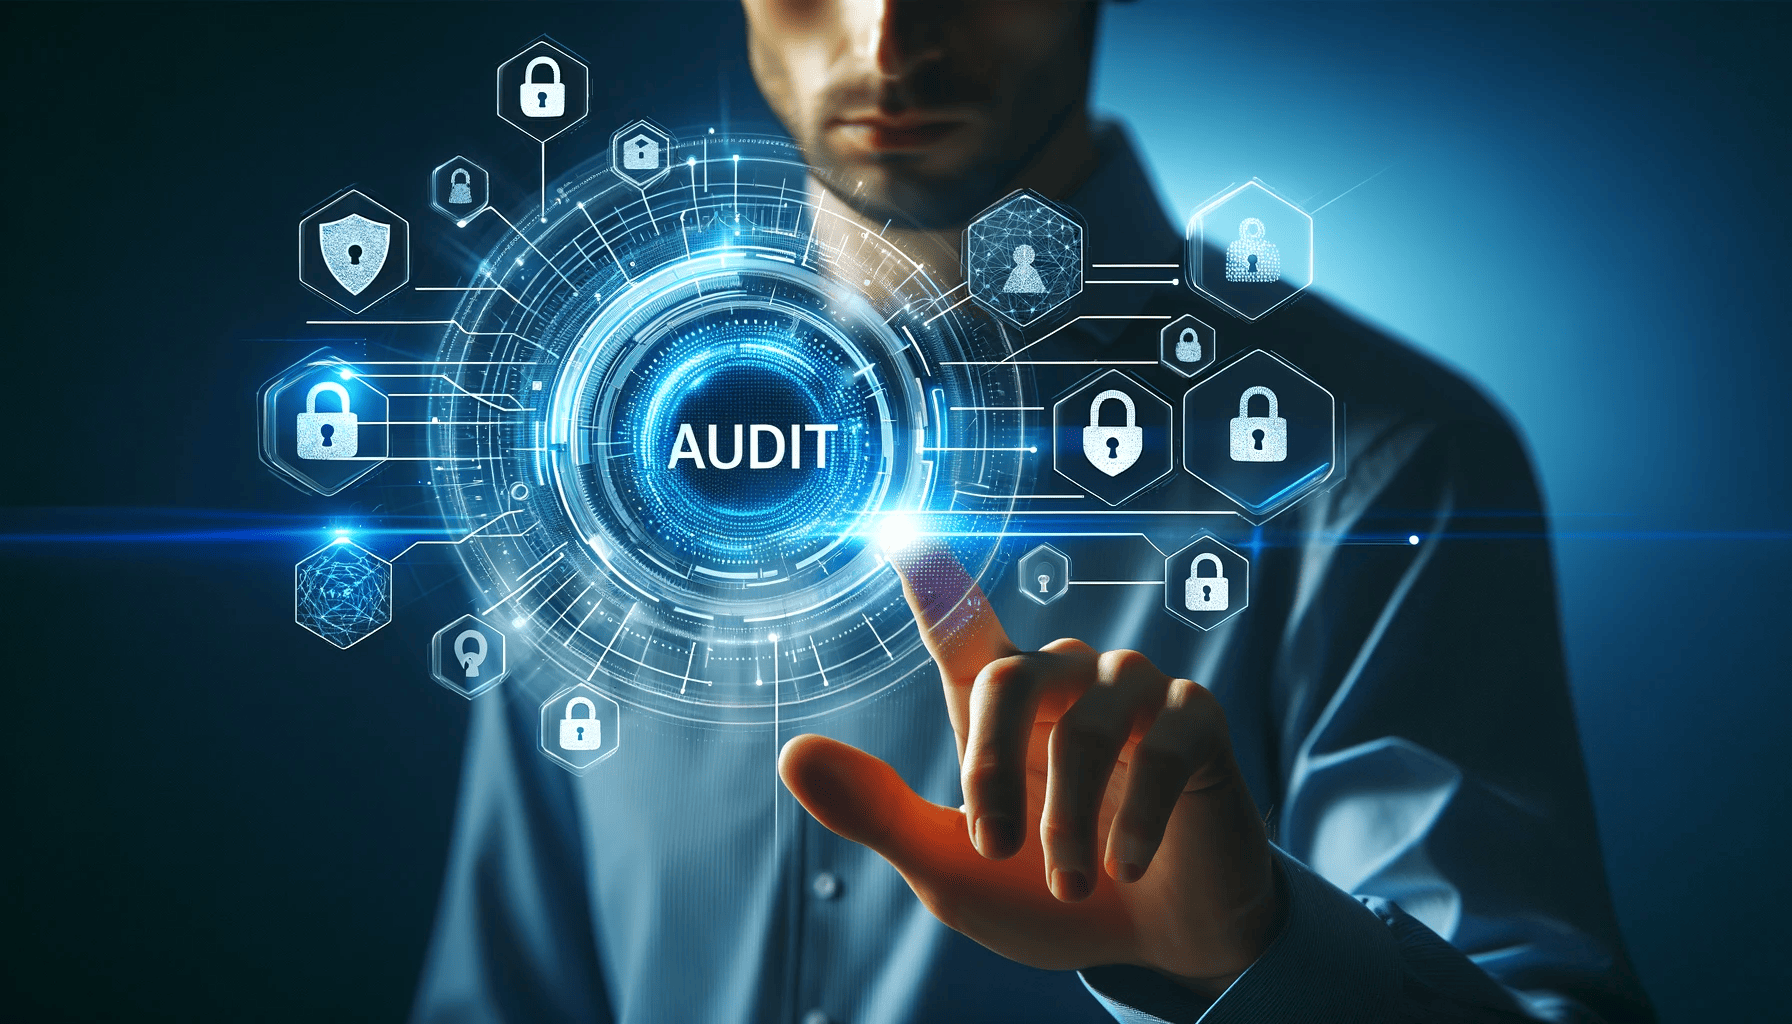 Simplifying Security with Netumo’s User-Friendly Security Audit